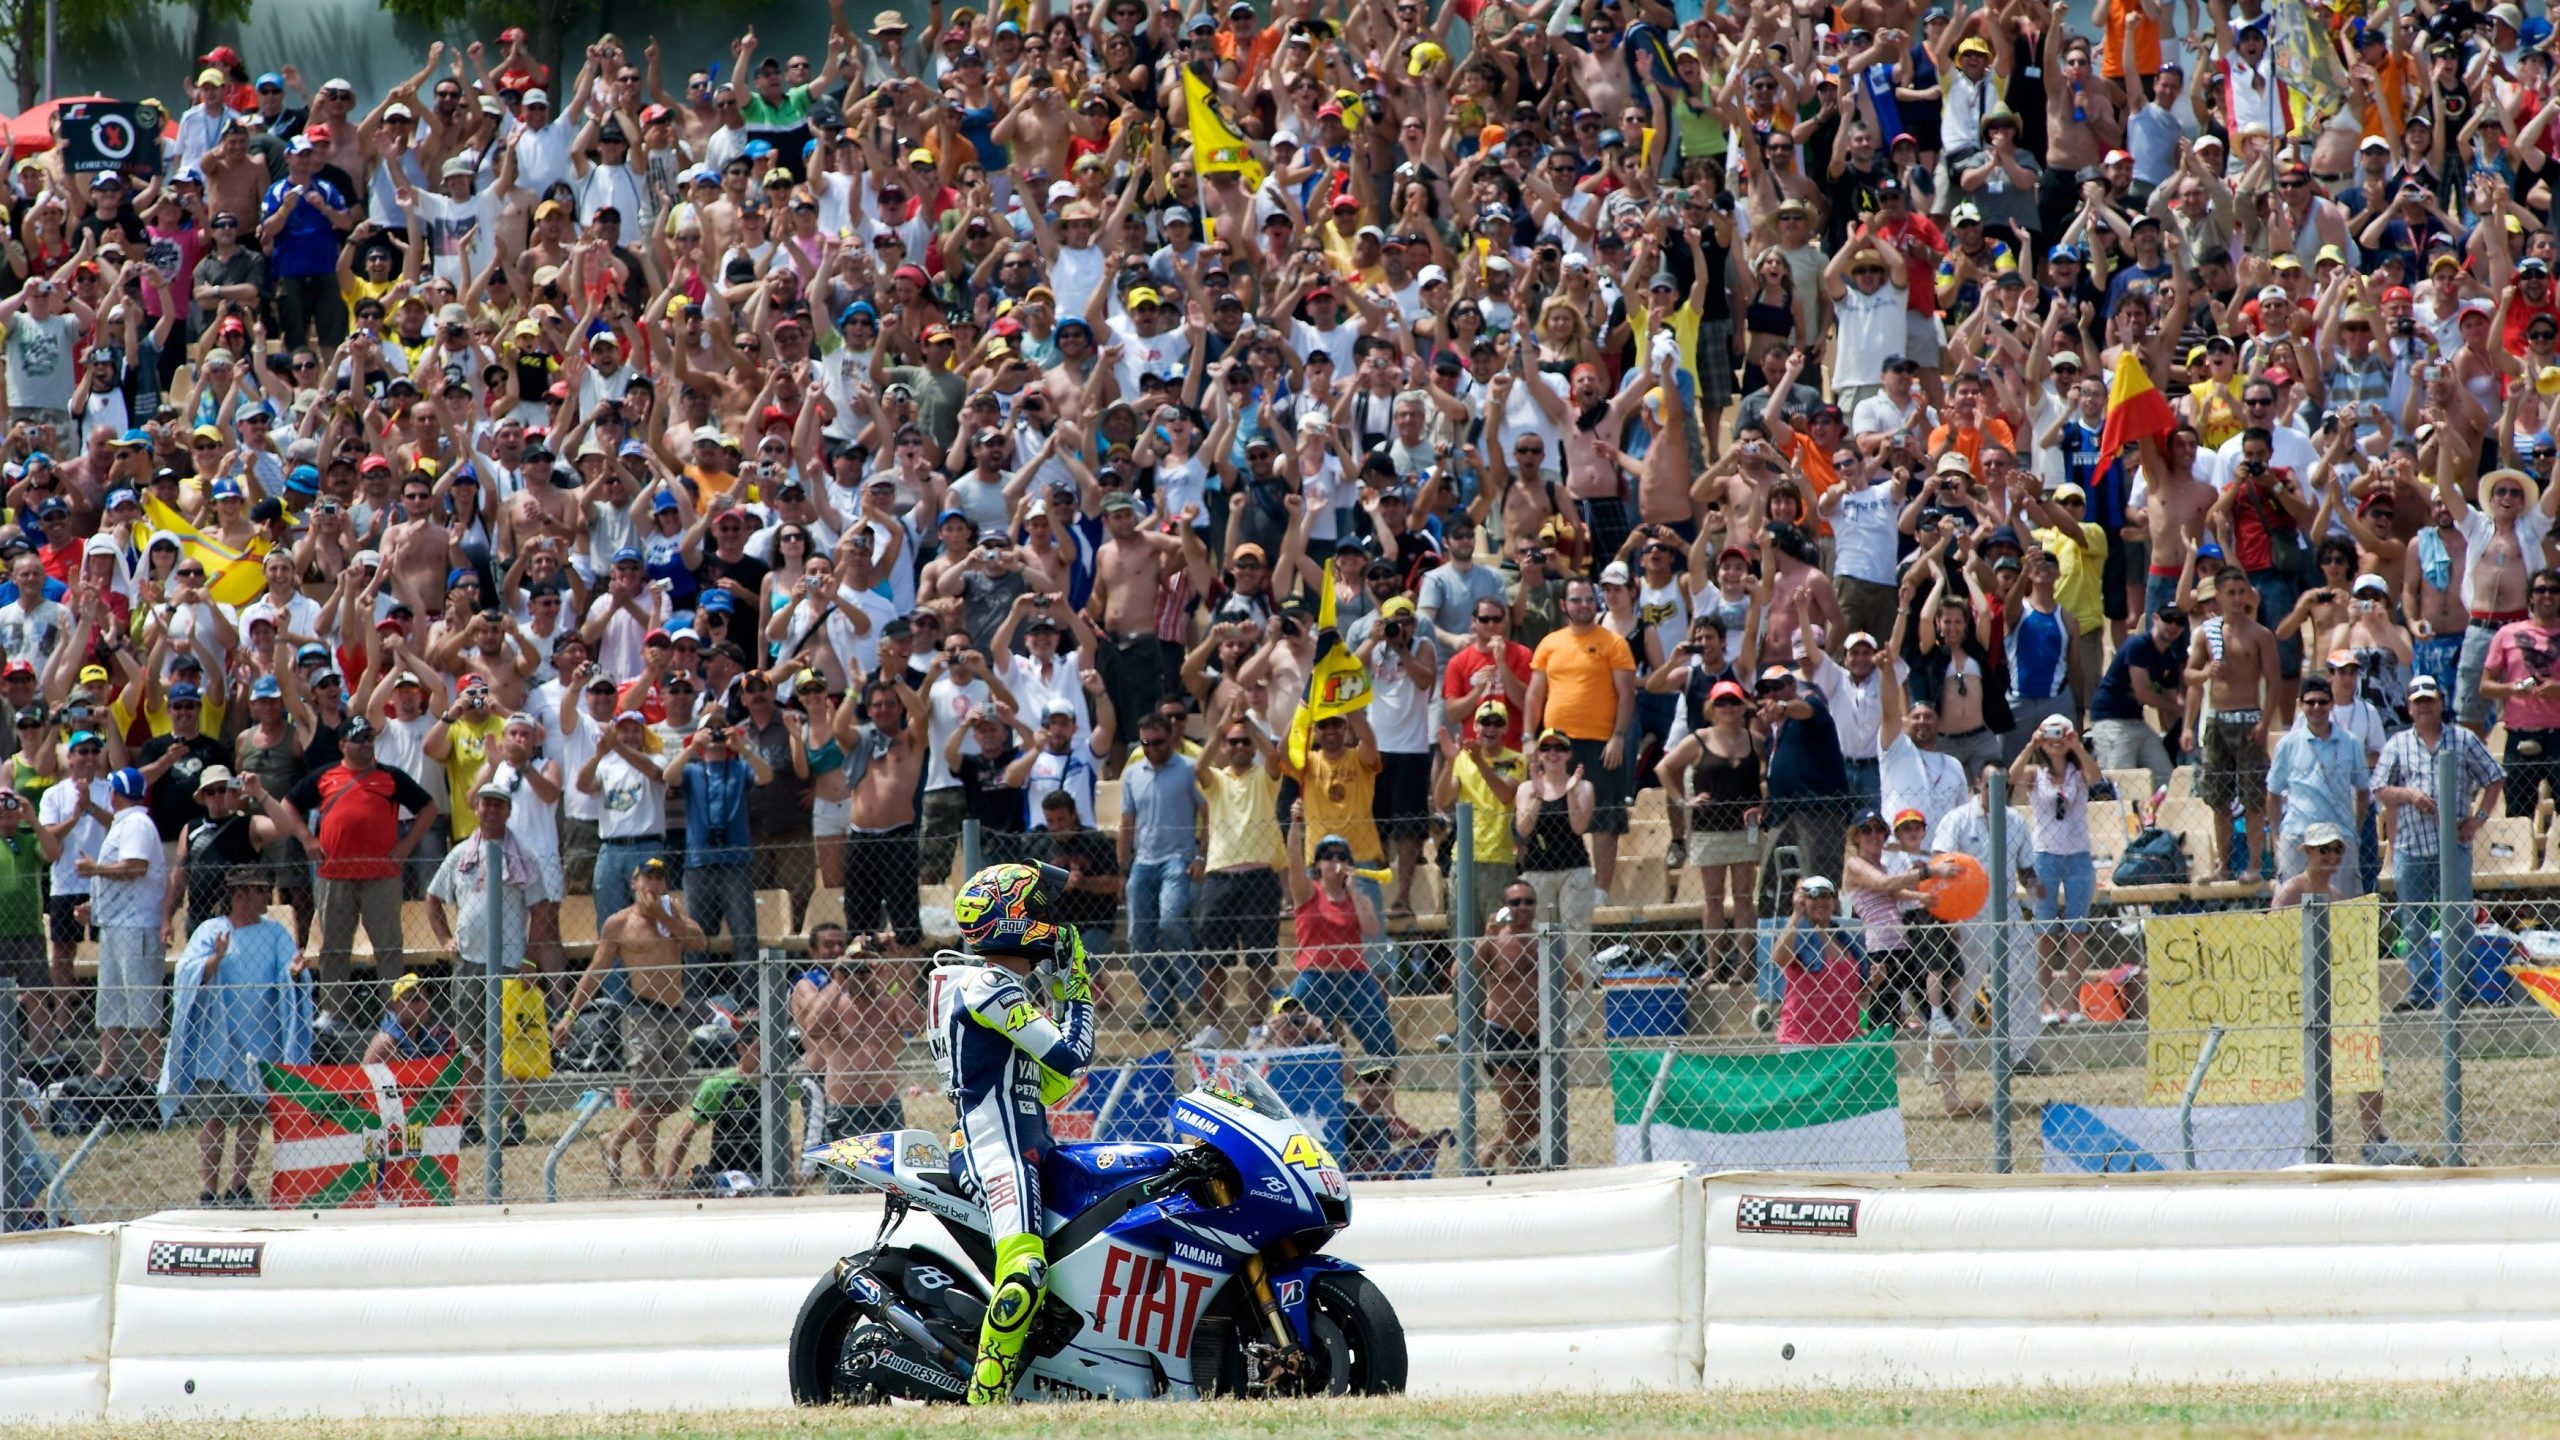 Who is Valentino Rossi?